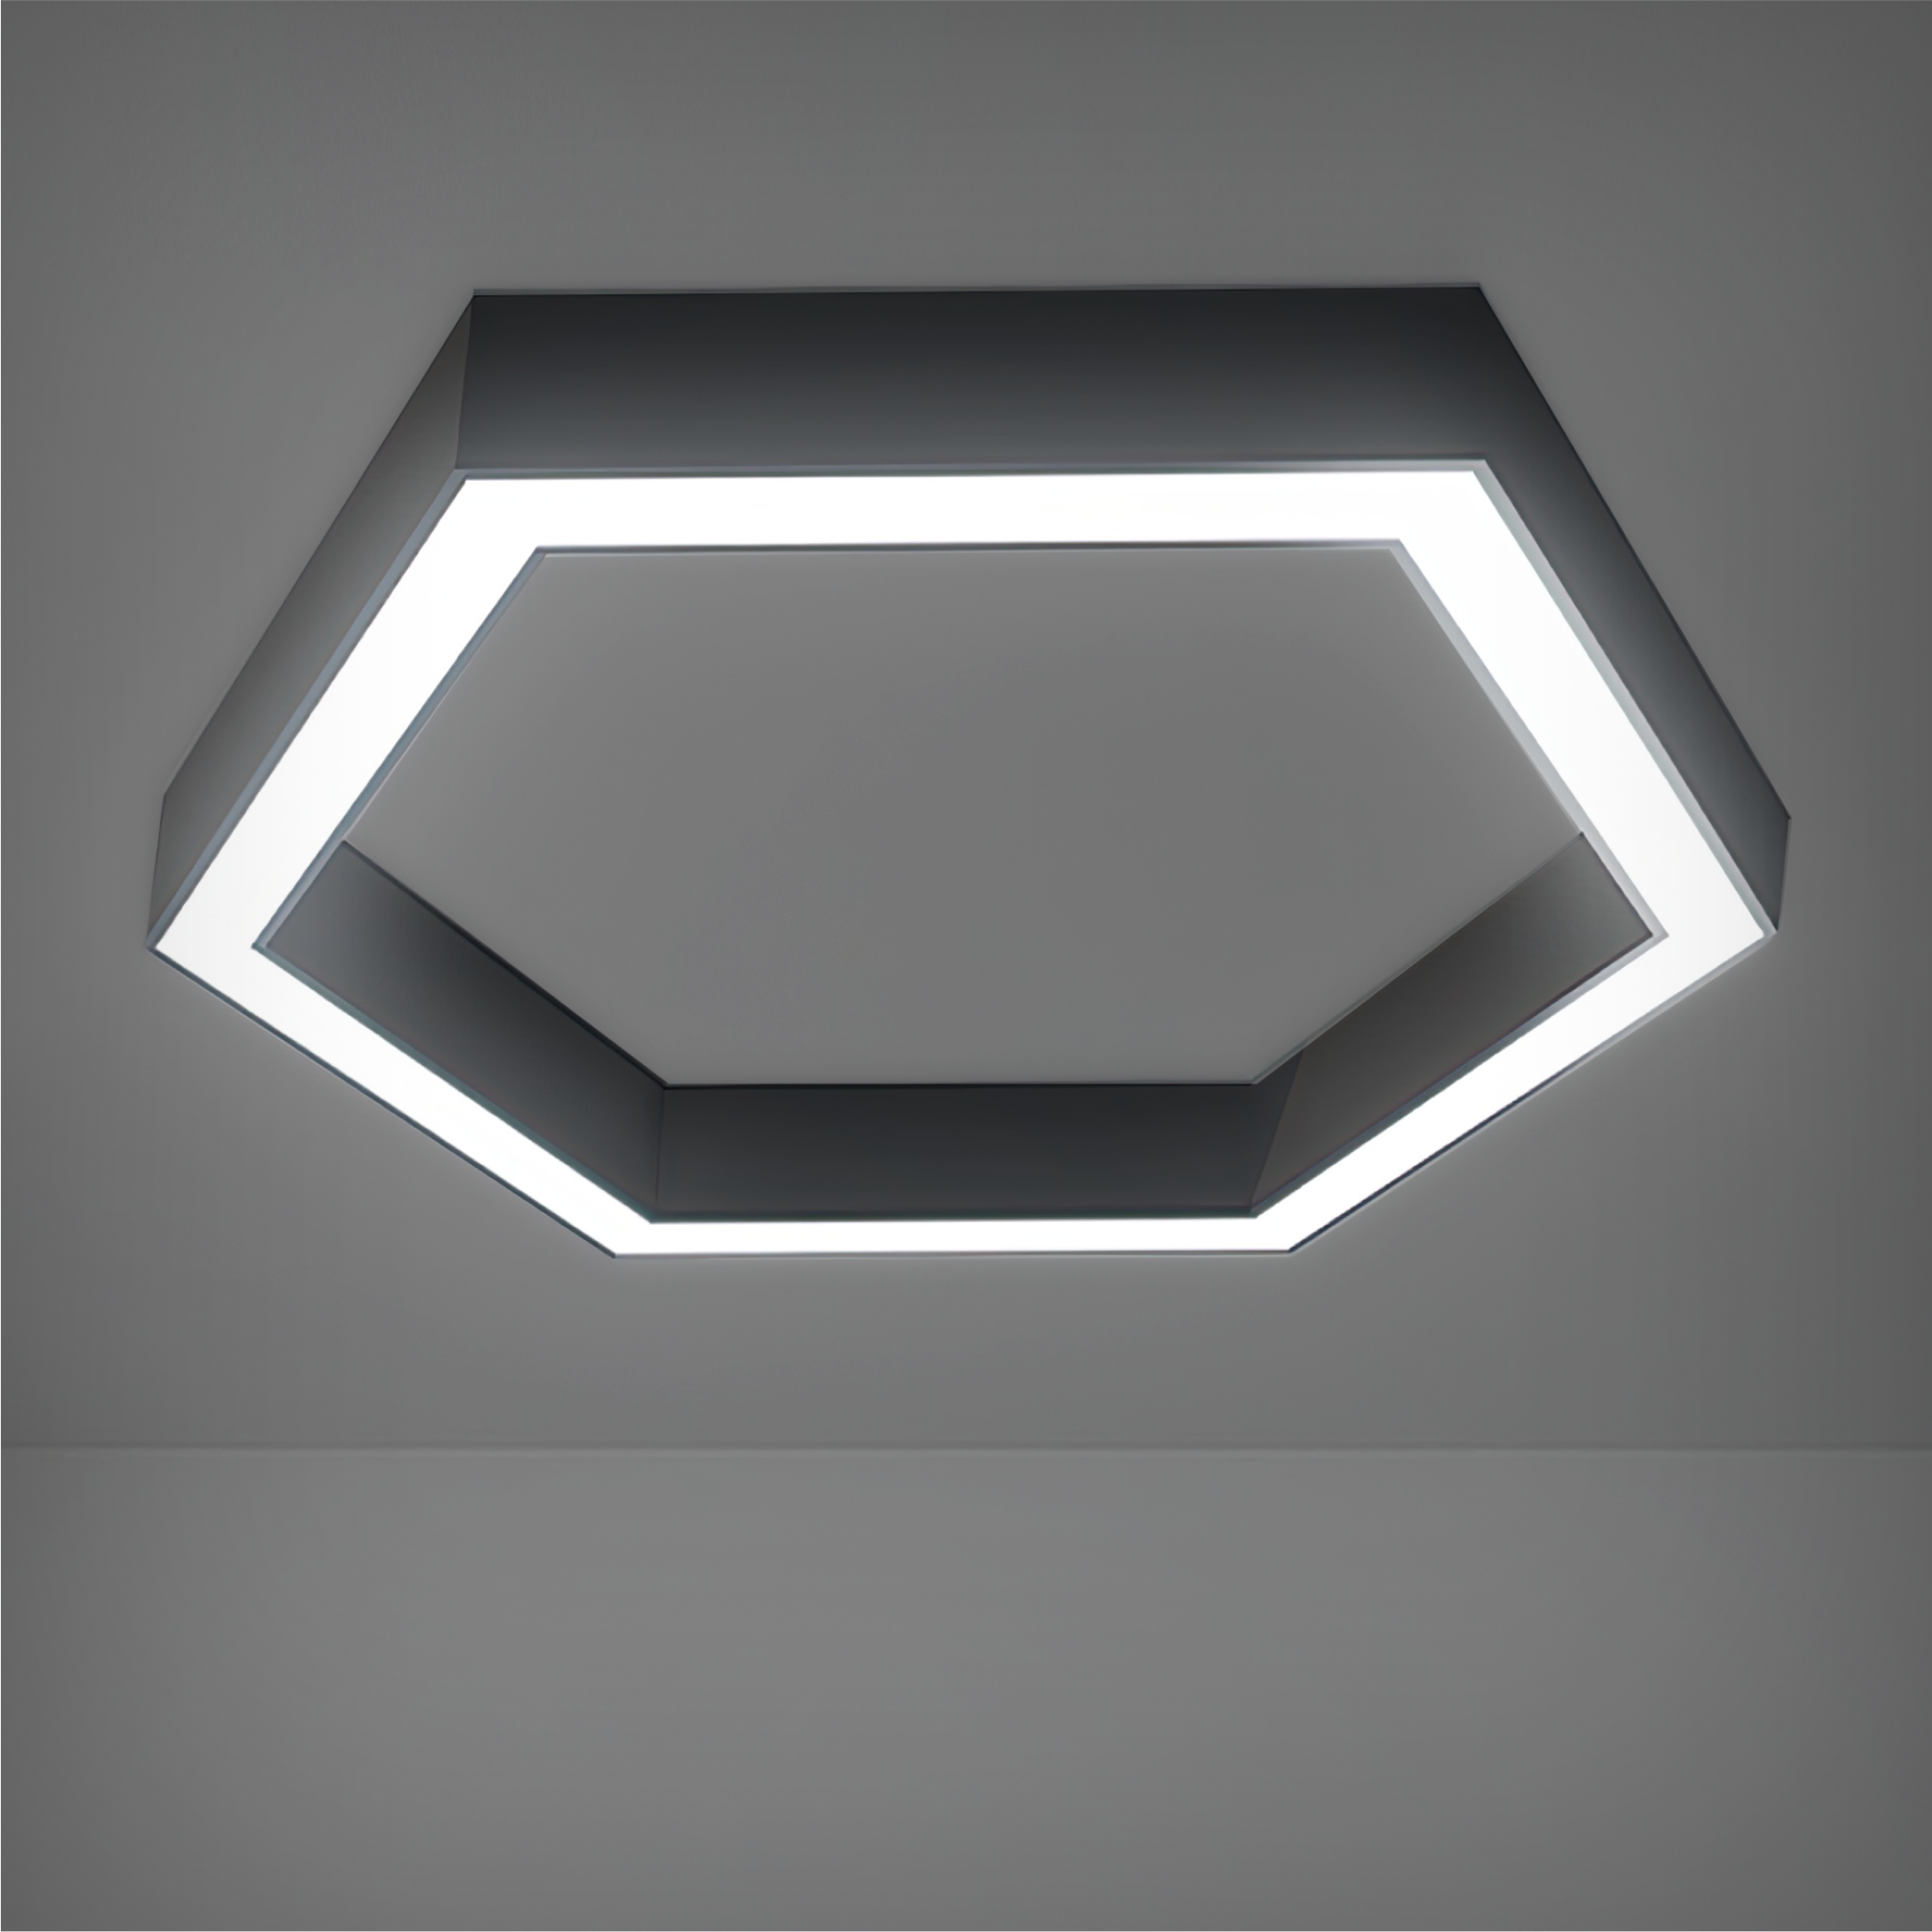 Hexagon LED Flush Mount Linear Ceiling Light with a 2.5-Inch size